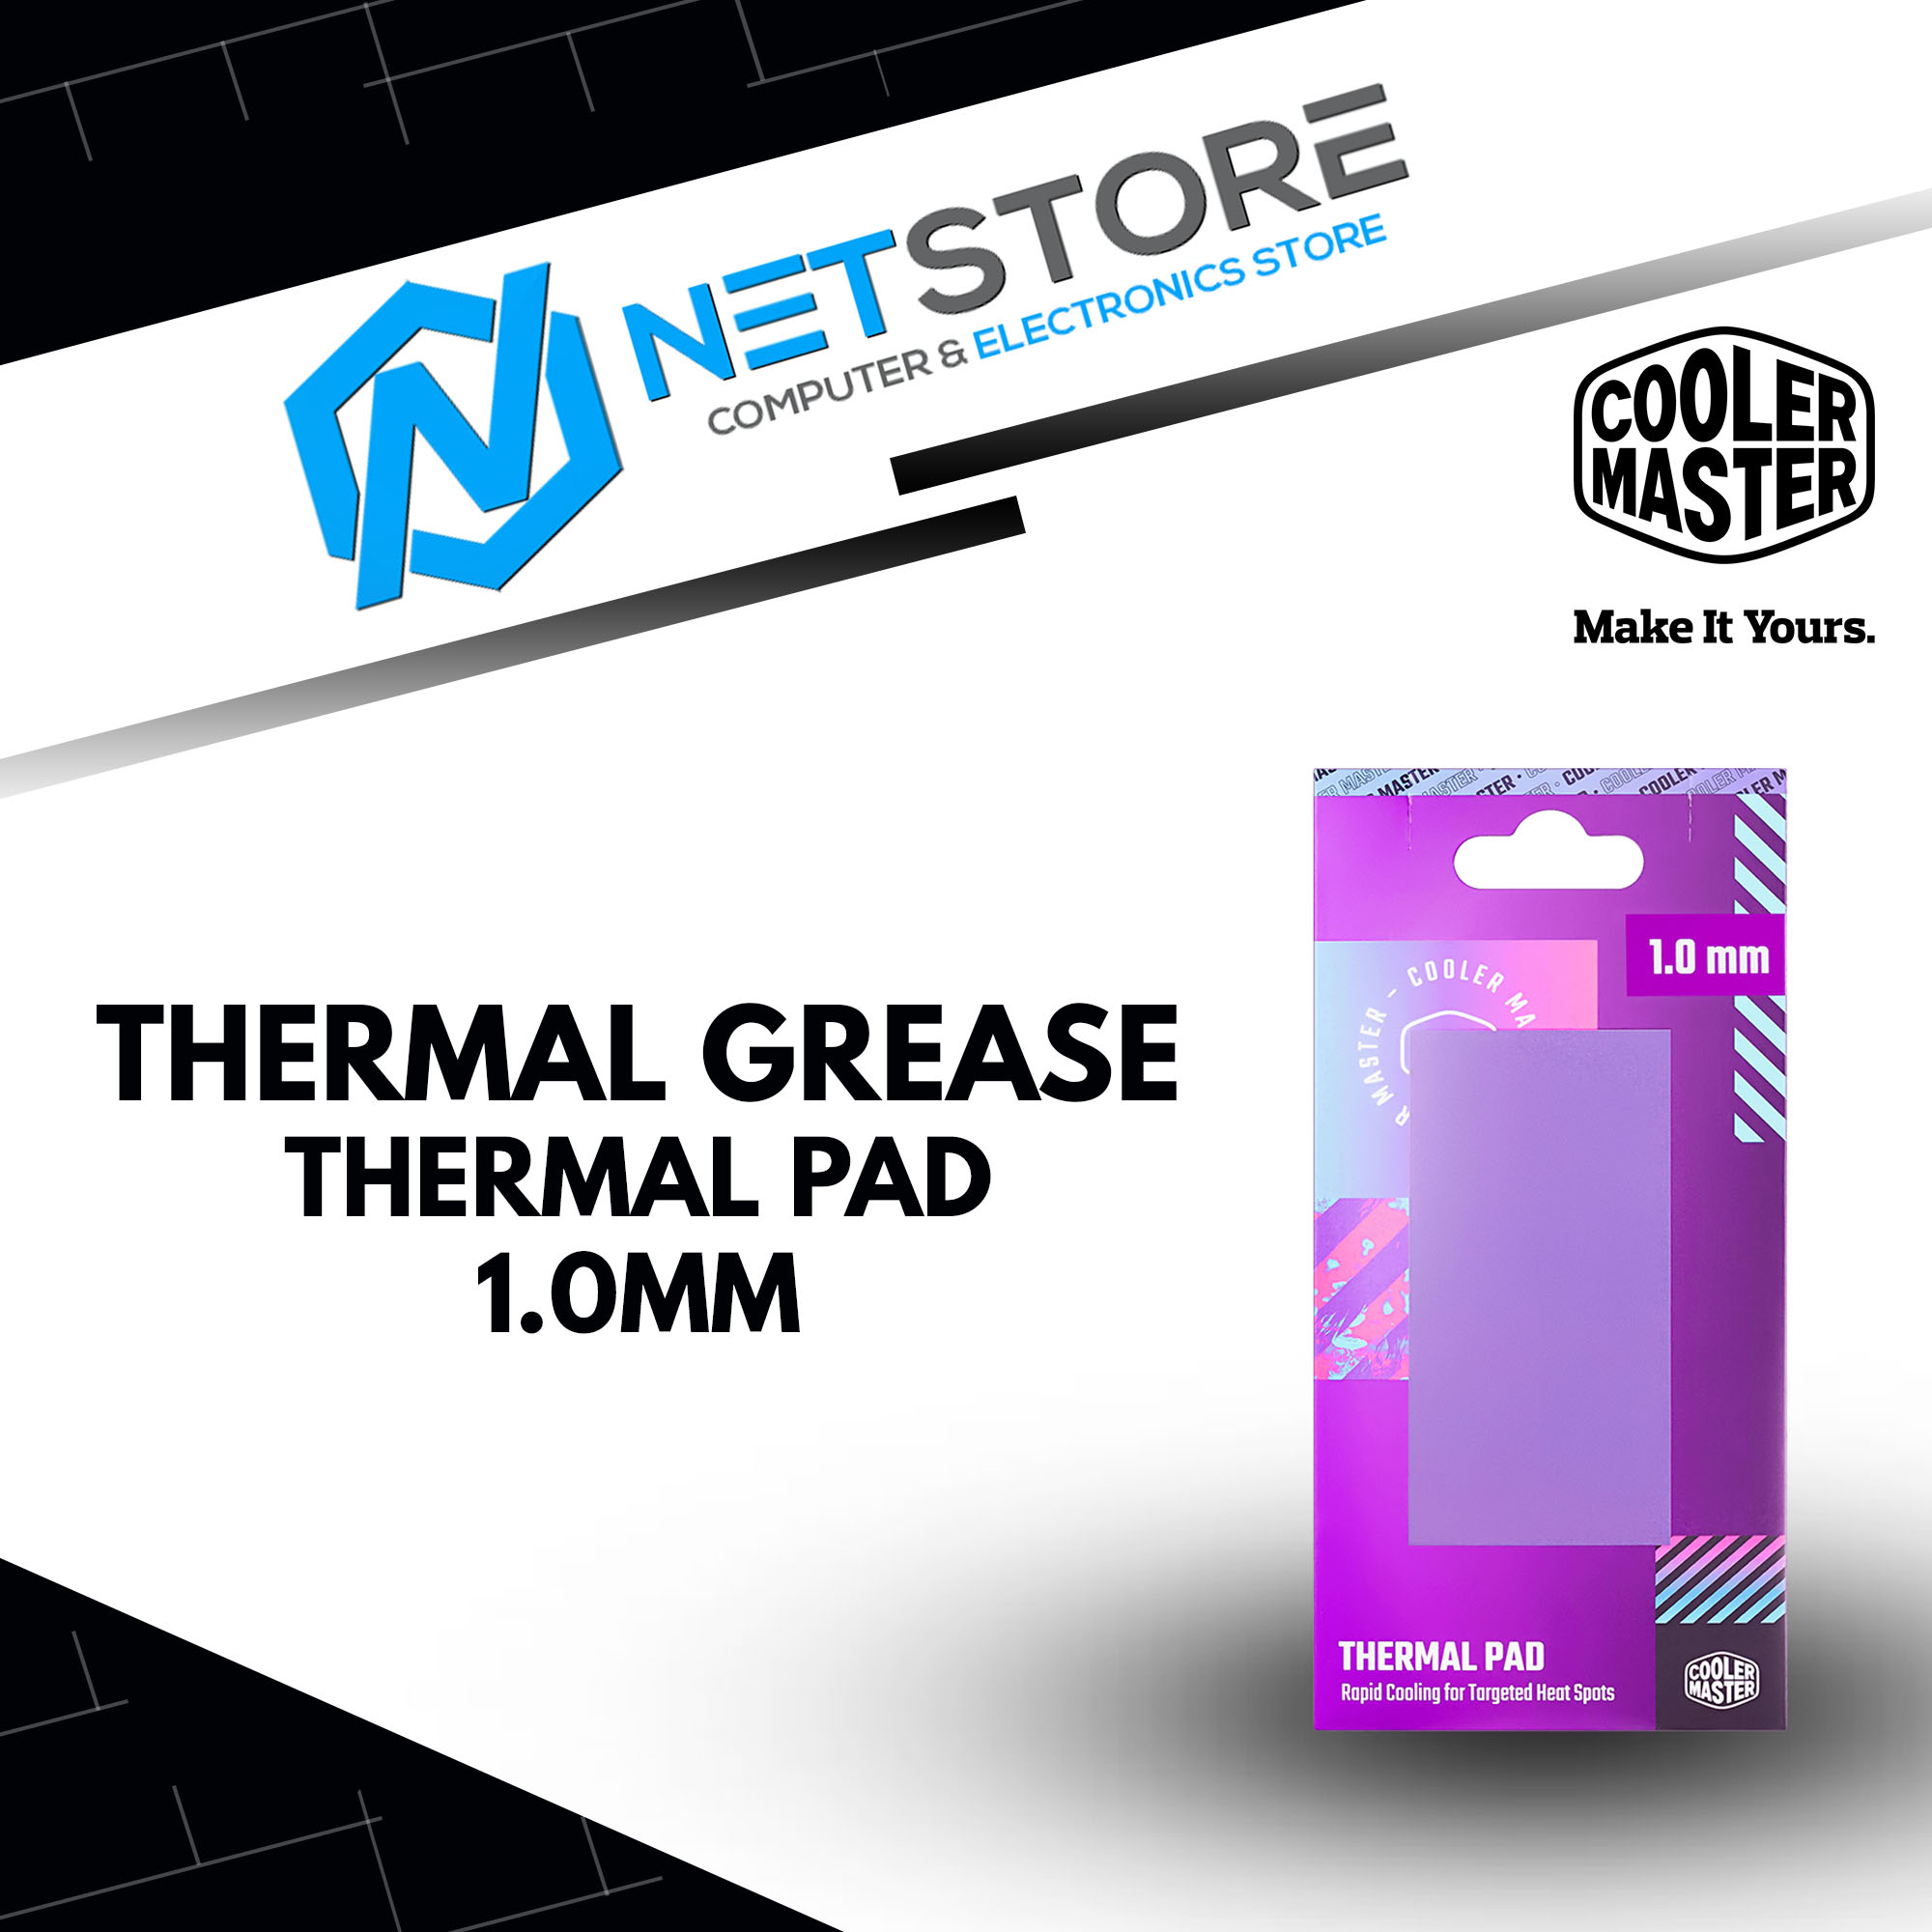 COOLER MASTER THERMAL GREASE THERMAL PAD 1.0MM - TPX-NOPP-9010-R1